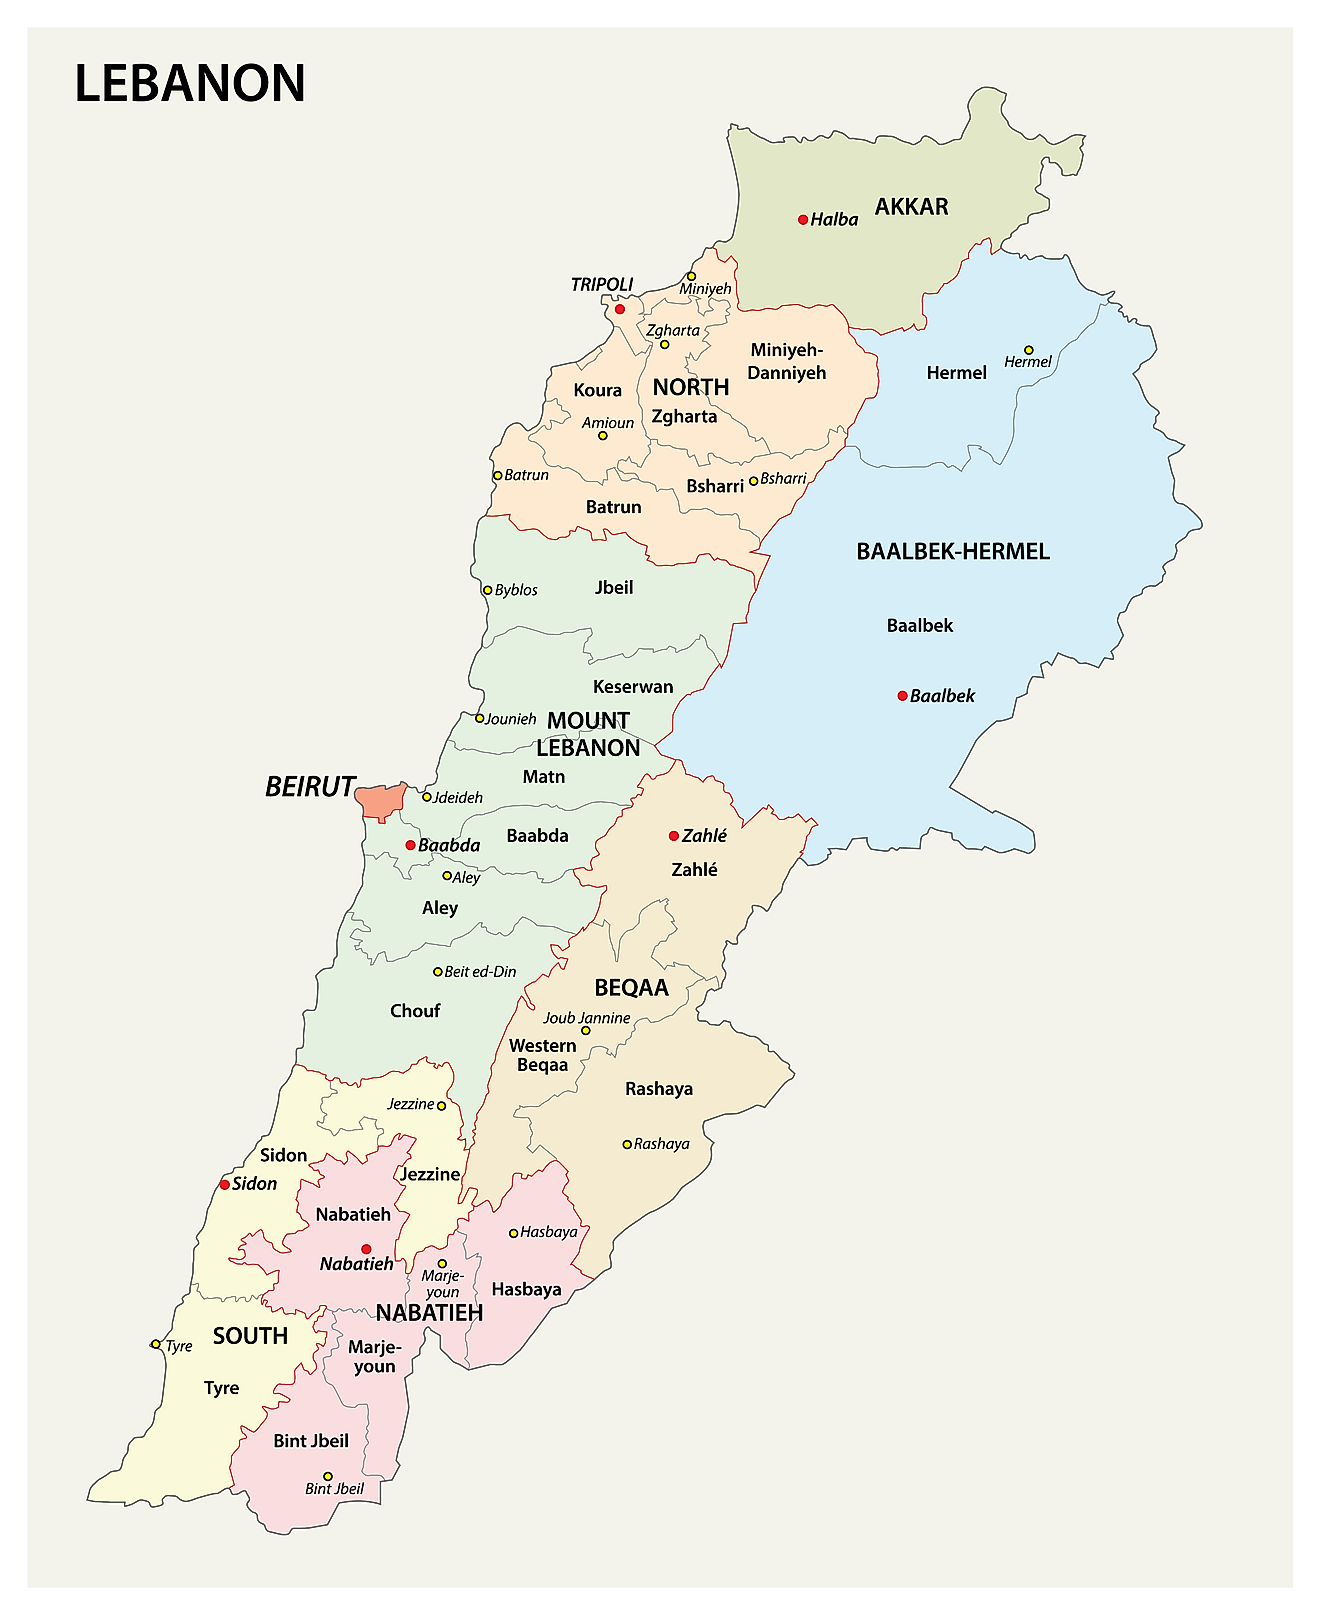 Political Map of Lebanon showing the 8 governorates, their capitals, and the national capital of Beirut.